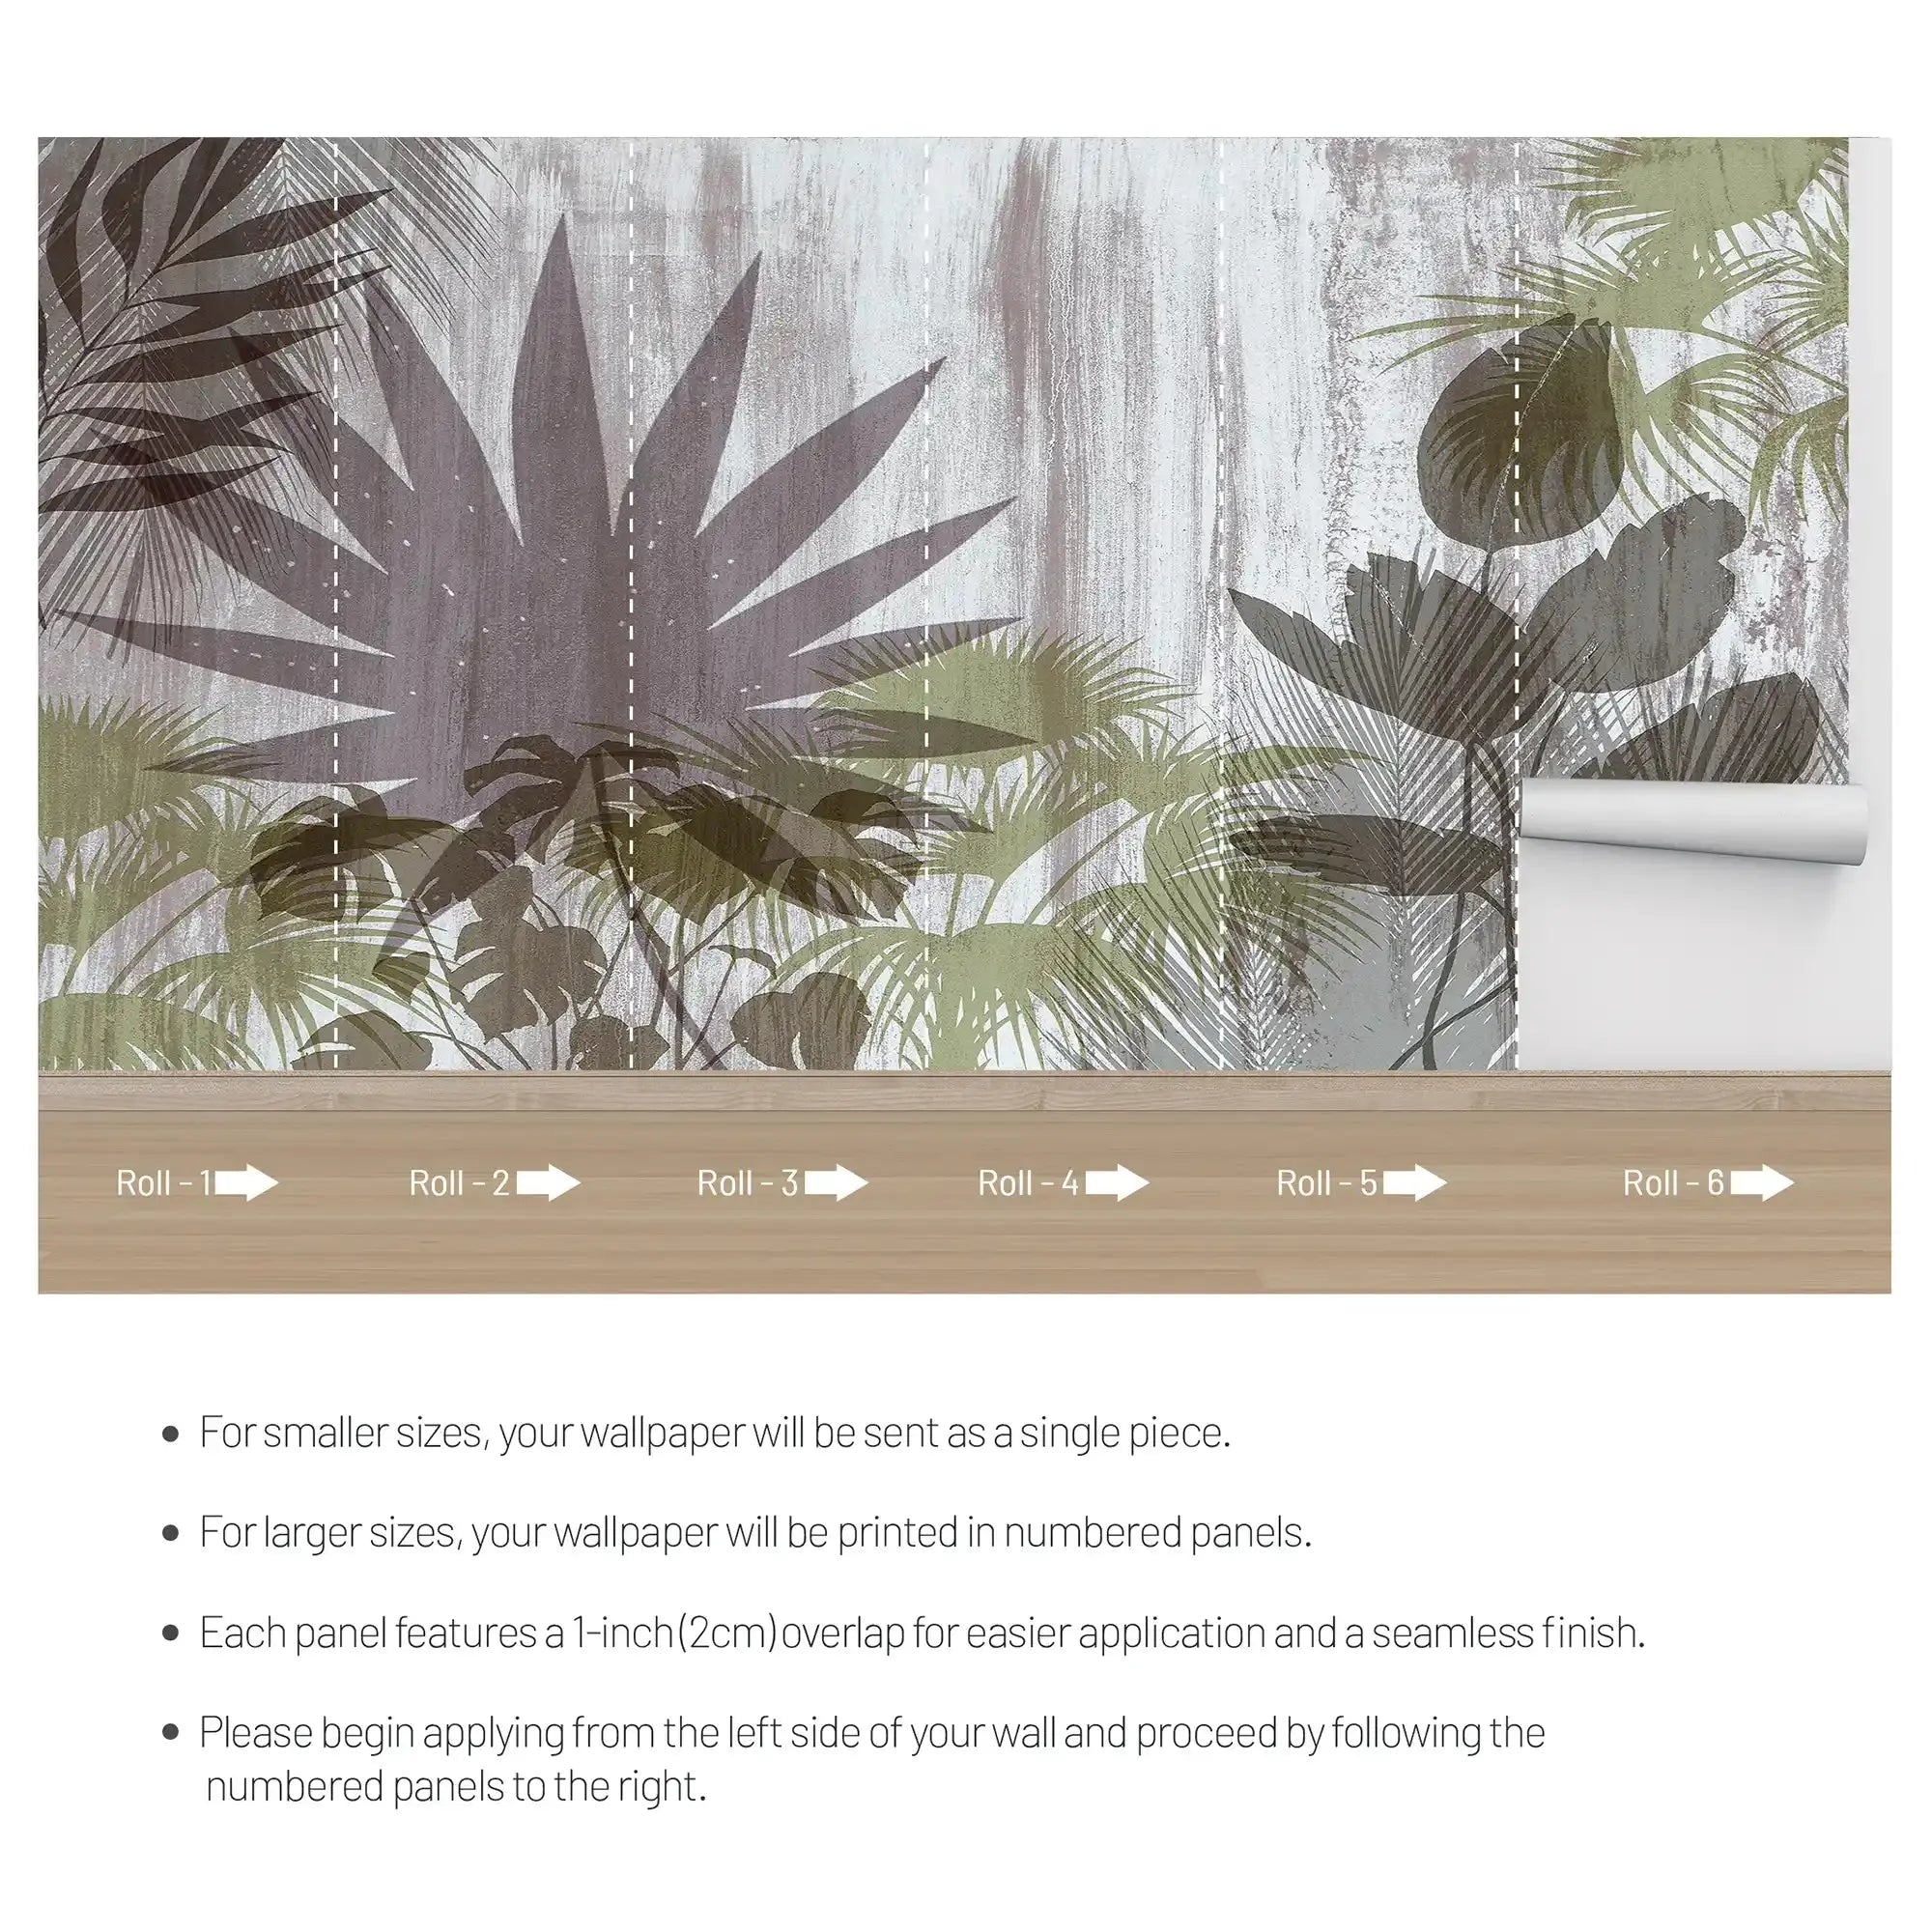 3077-A / Botanical Wall Mural: Peel and Stick Wallpaper with Wild Floral and Plant Motif - Artevella